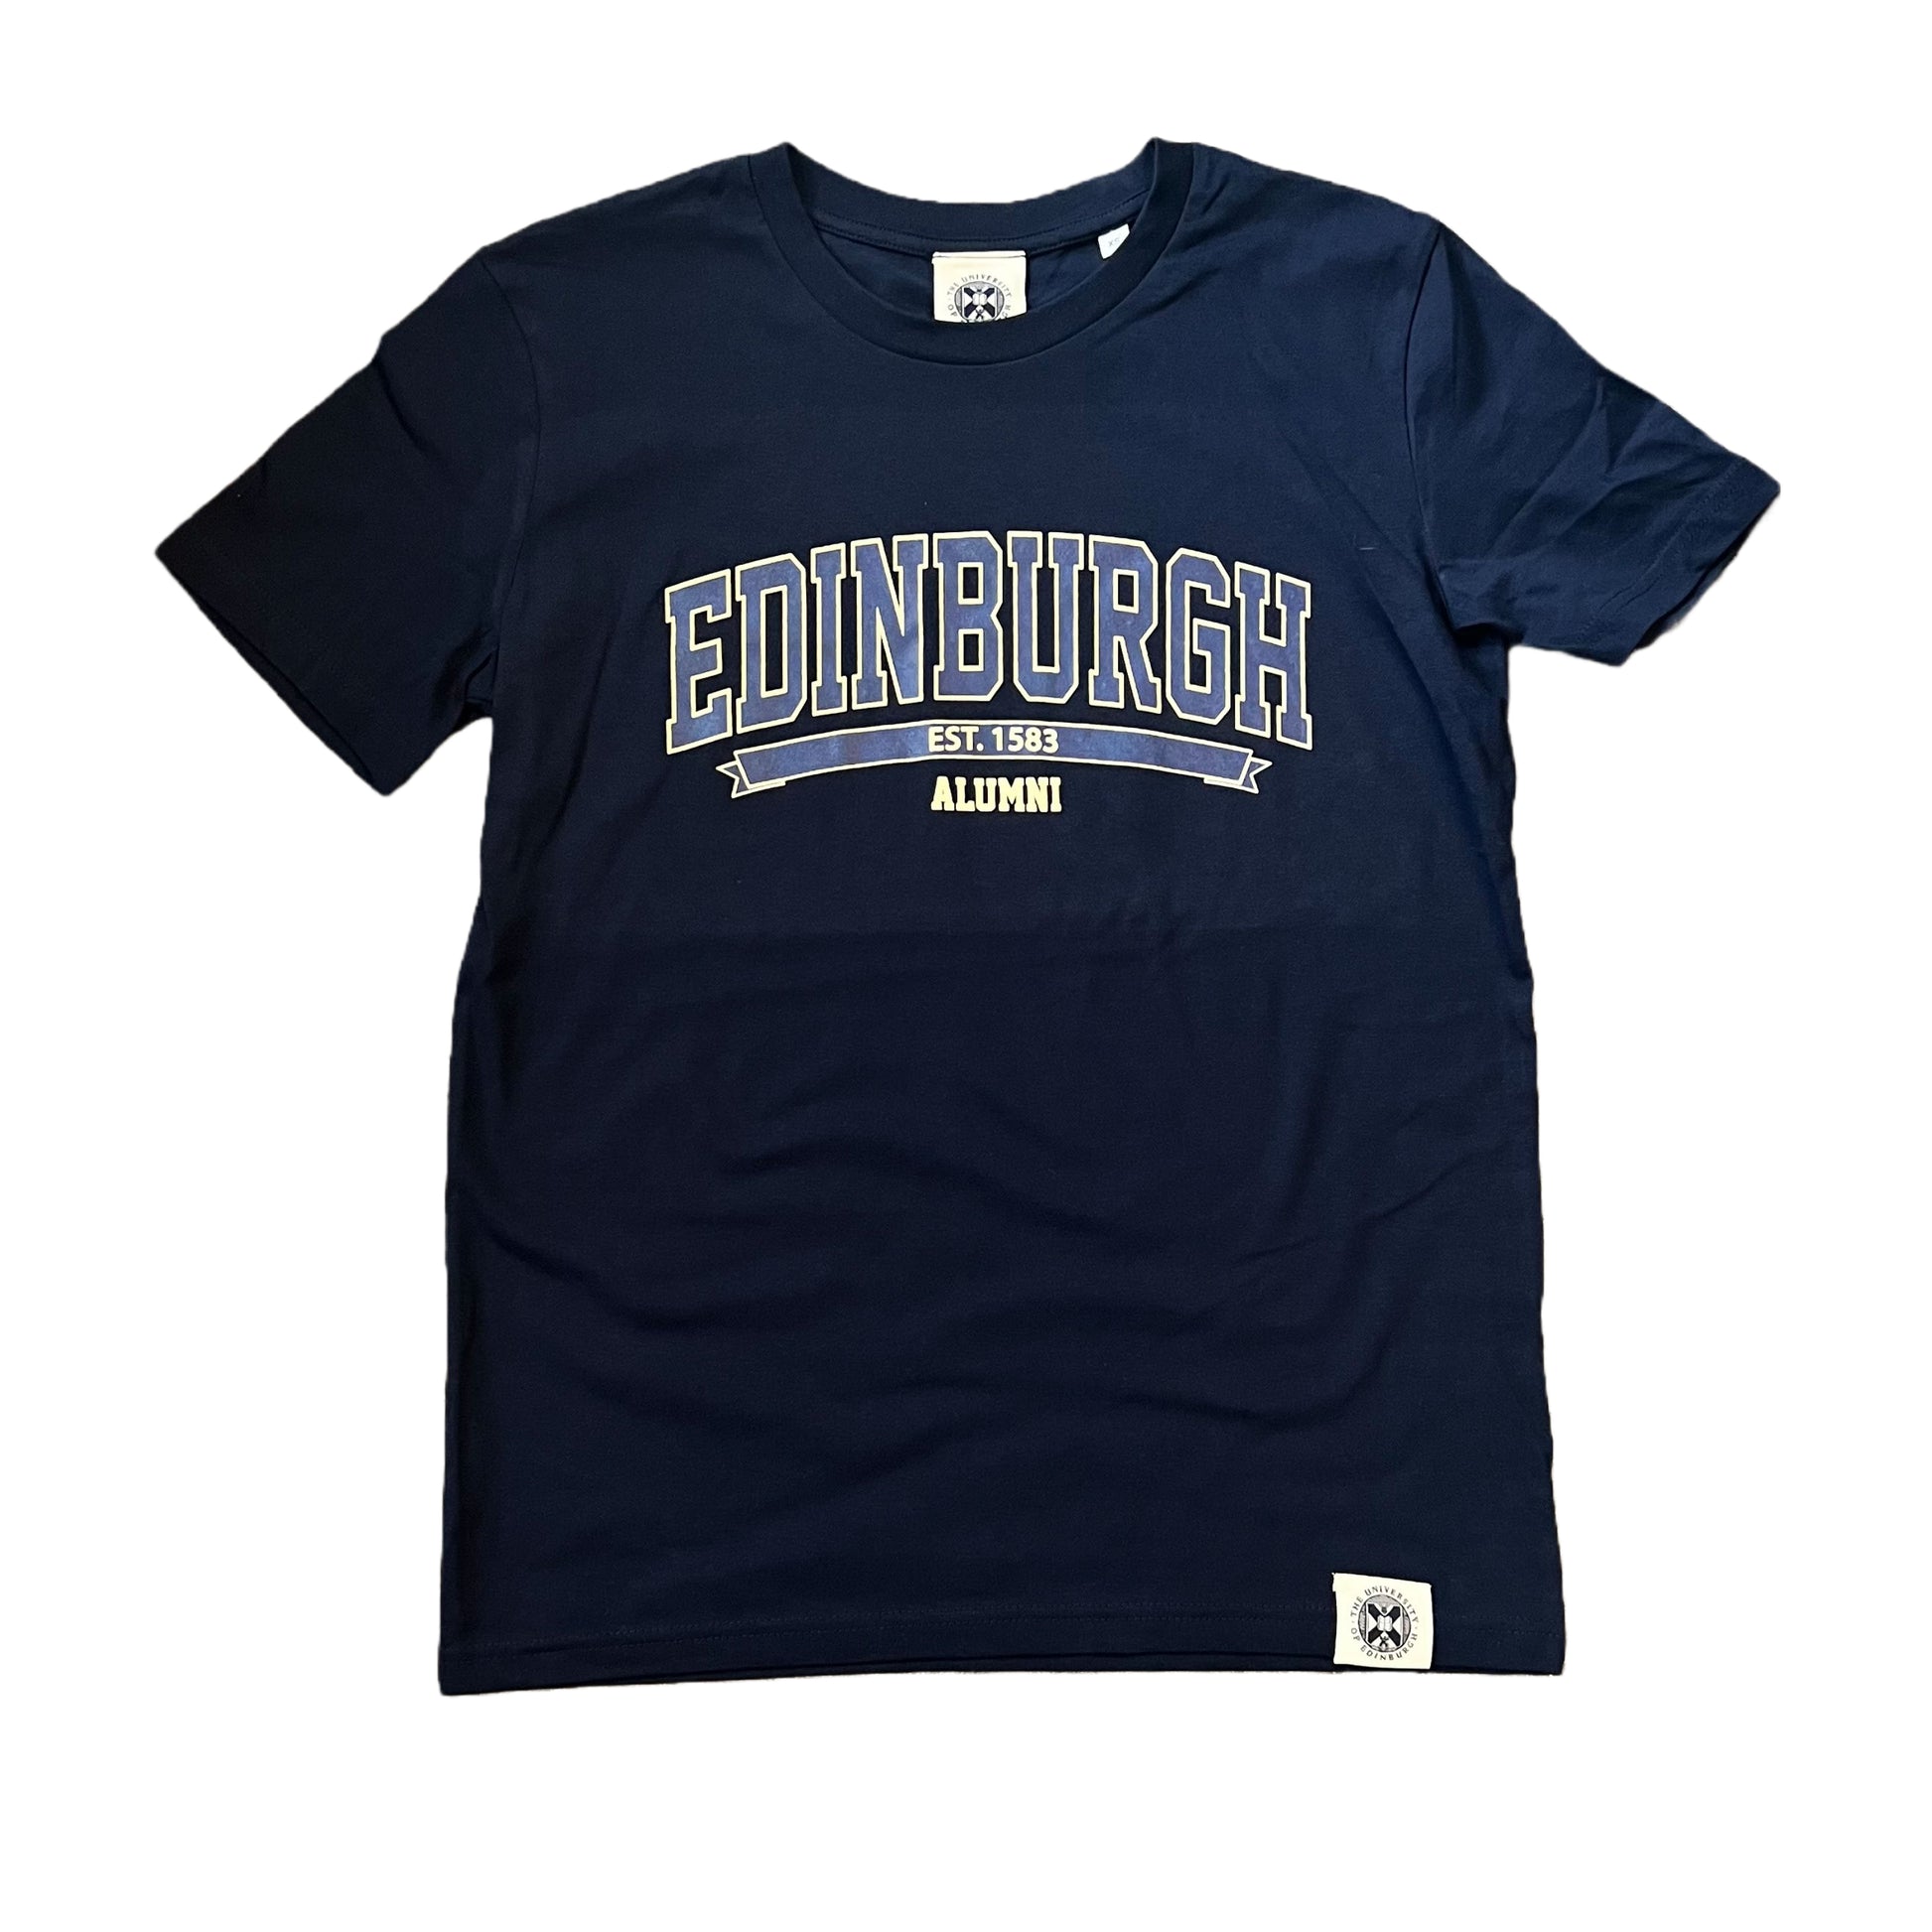 Navy T-shirt with 'EDINBURGH ALUMNI' text on the front in a lighter blue colour